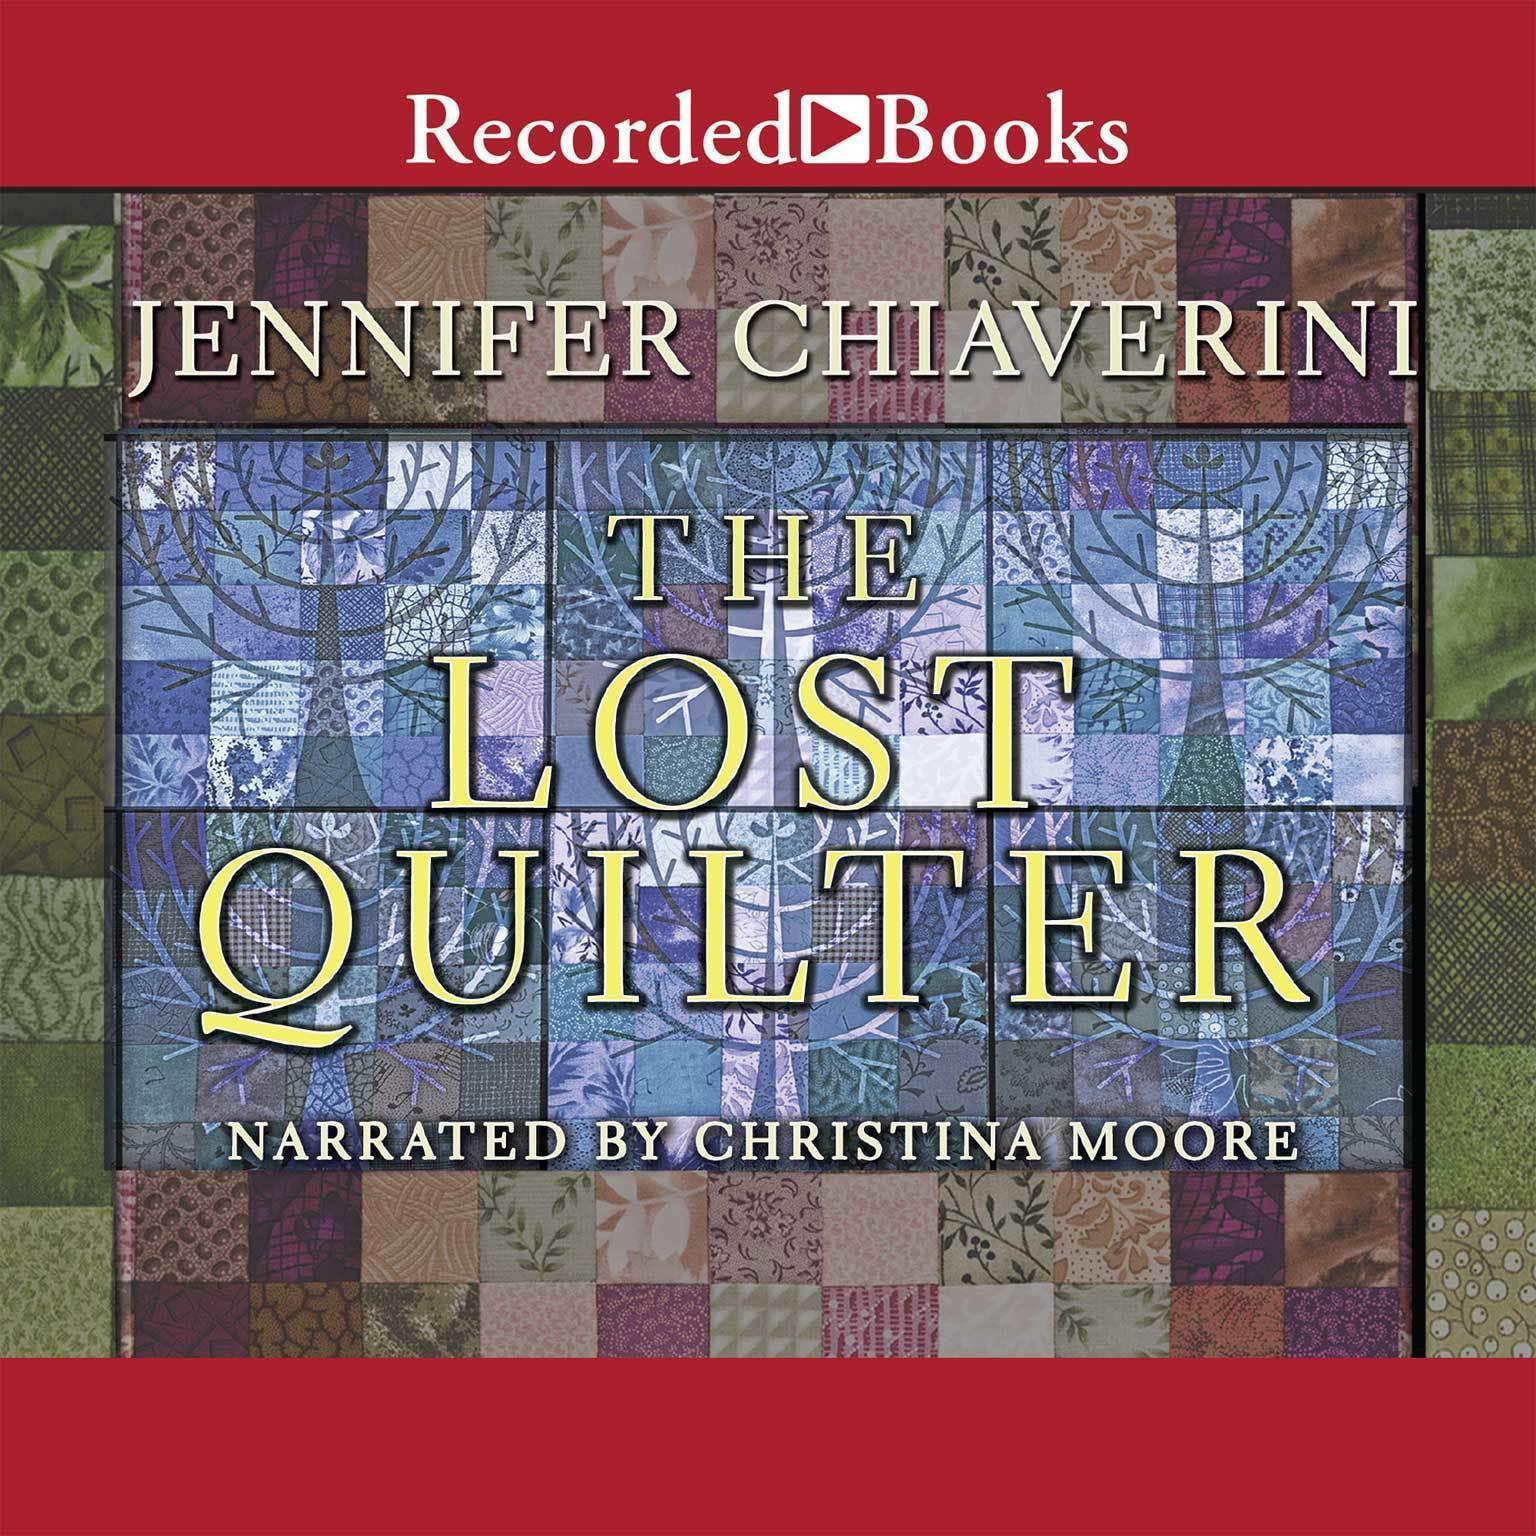 The Lost Quilter Audiobook, by Jennifer Chiaverini